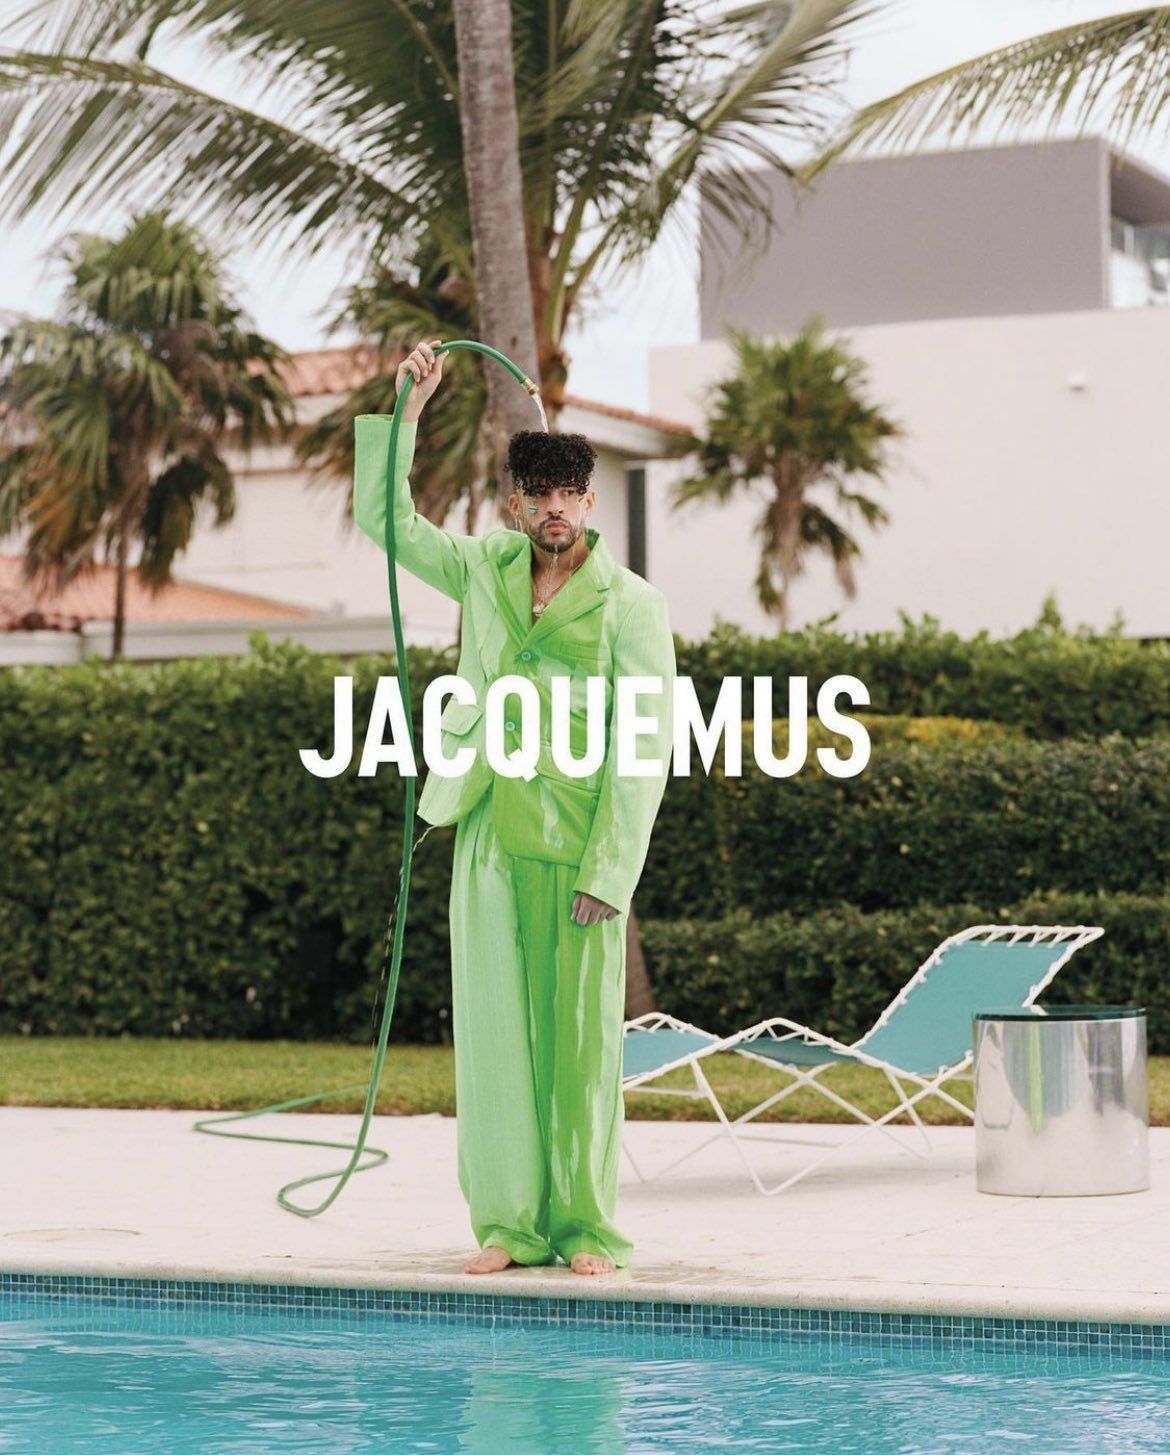 Bad Bunny Is the Star of Jacquemus's New Spring Campaign